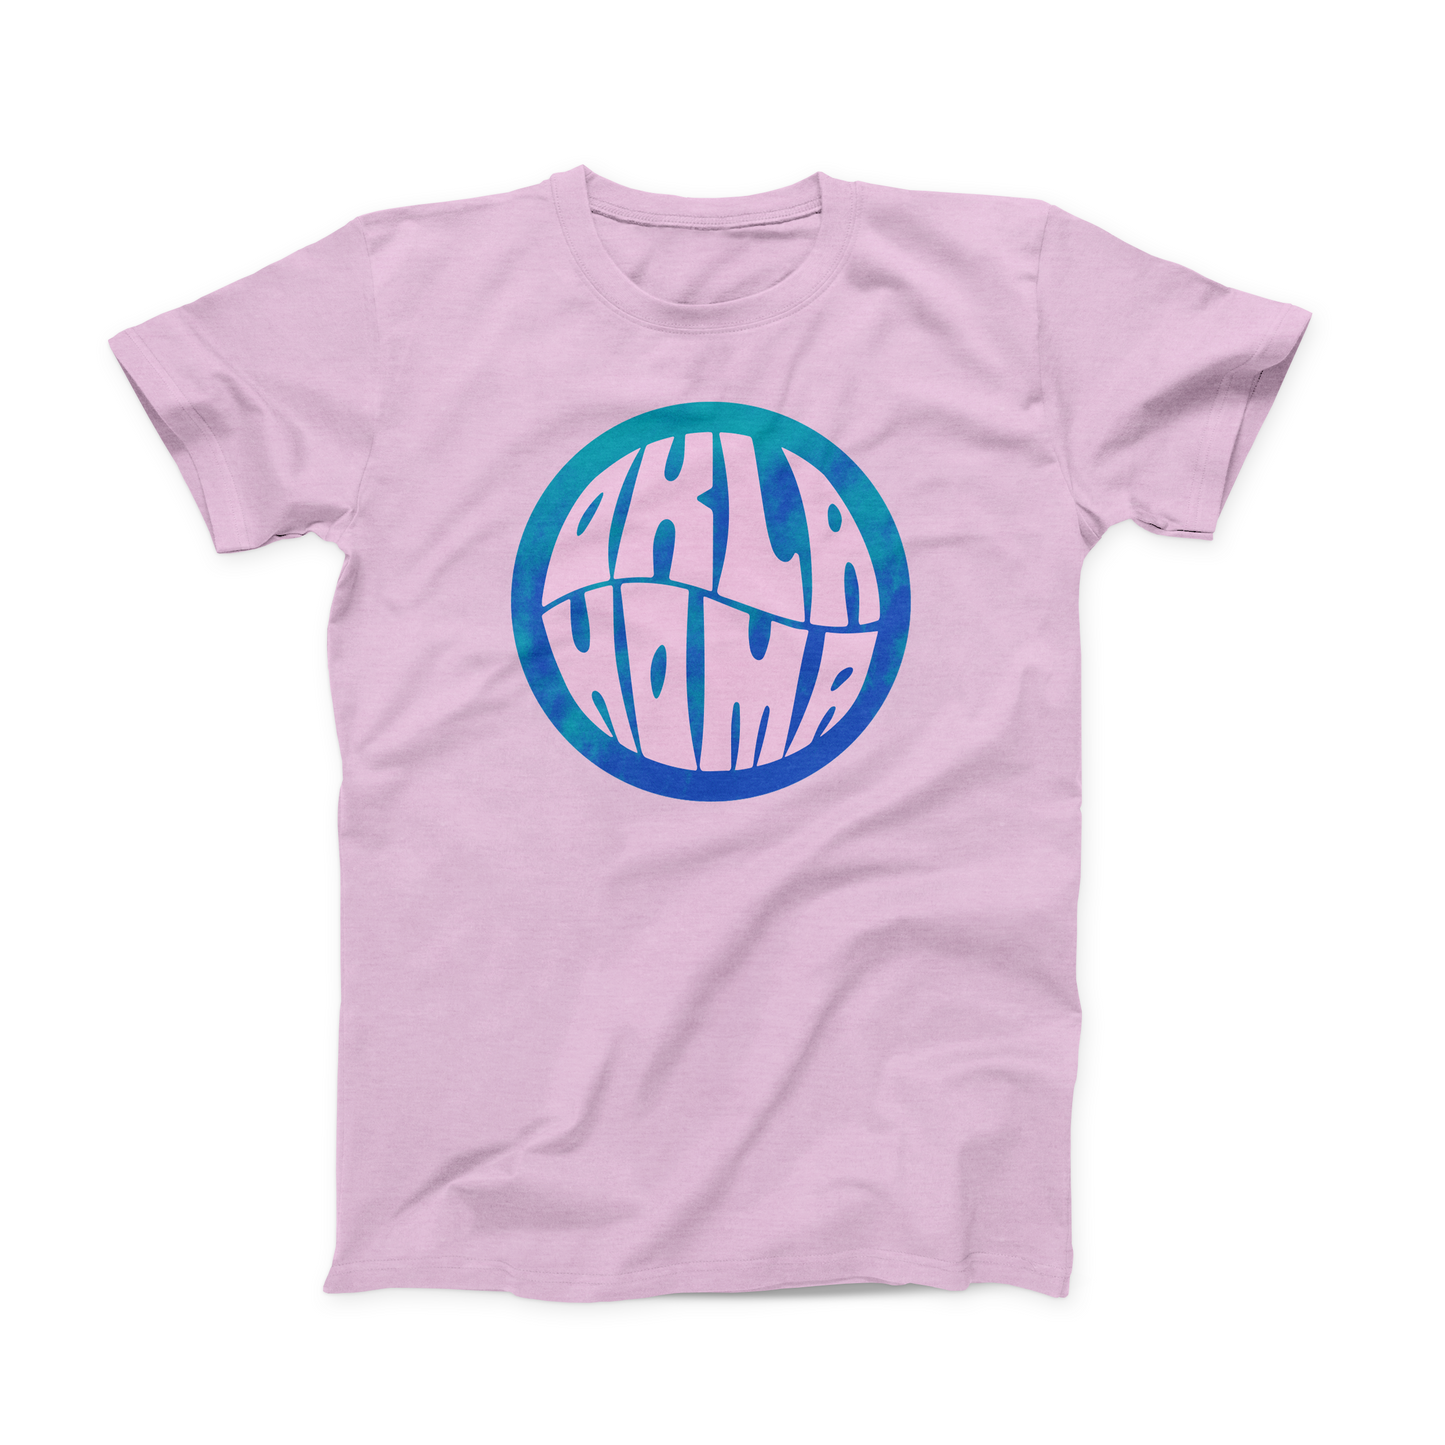 Lilac colored Oklahoma T-shirt. Screen printed in a pixelated circle of teal and blue is "OKLA" stacked atop "HOMA" in a curvy font to fill the whole space of the circle. 